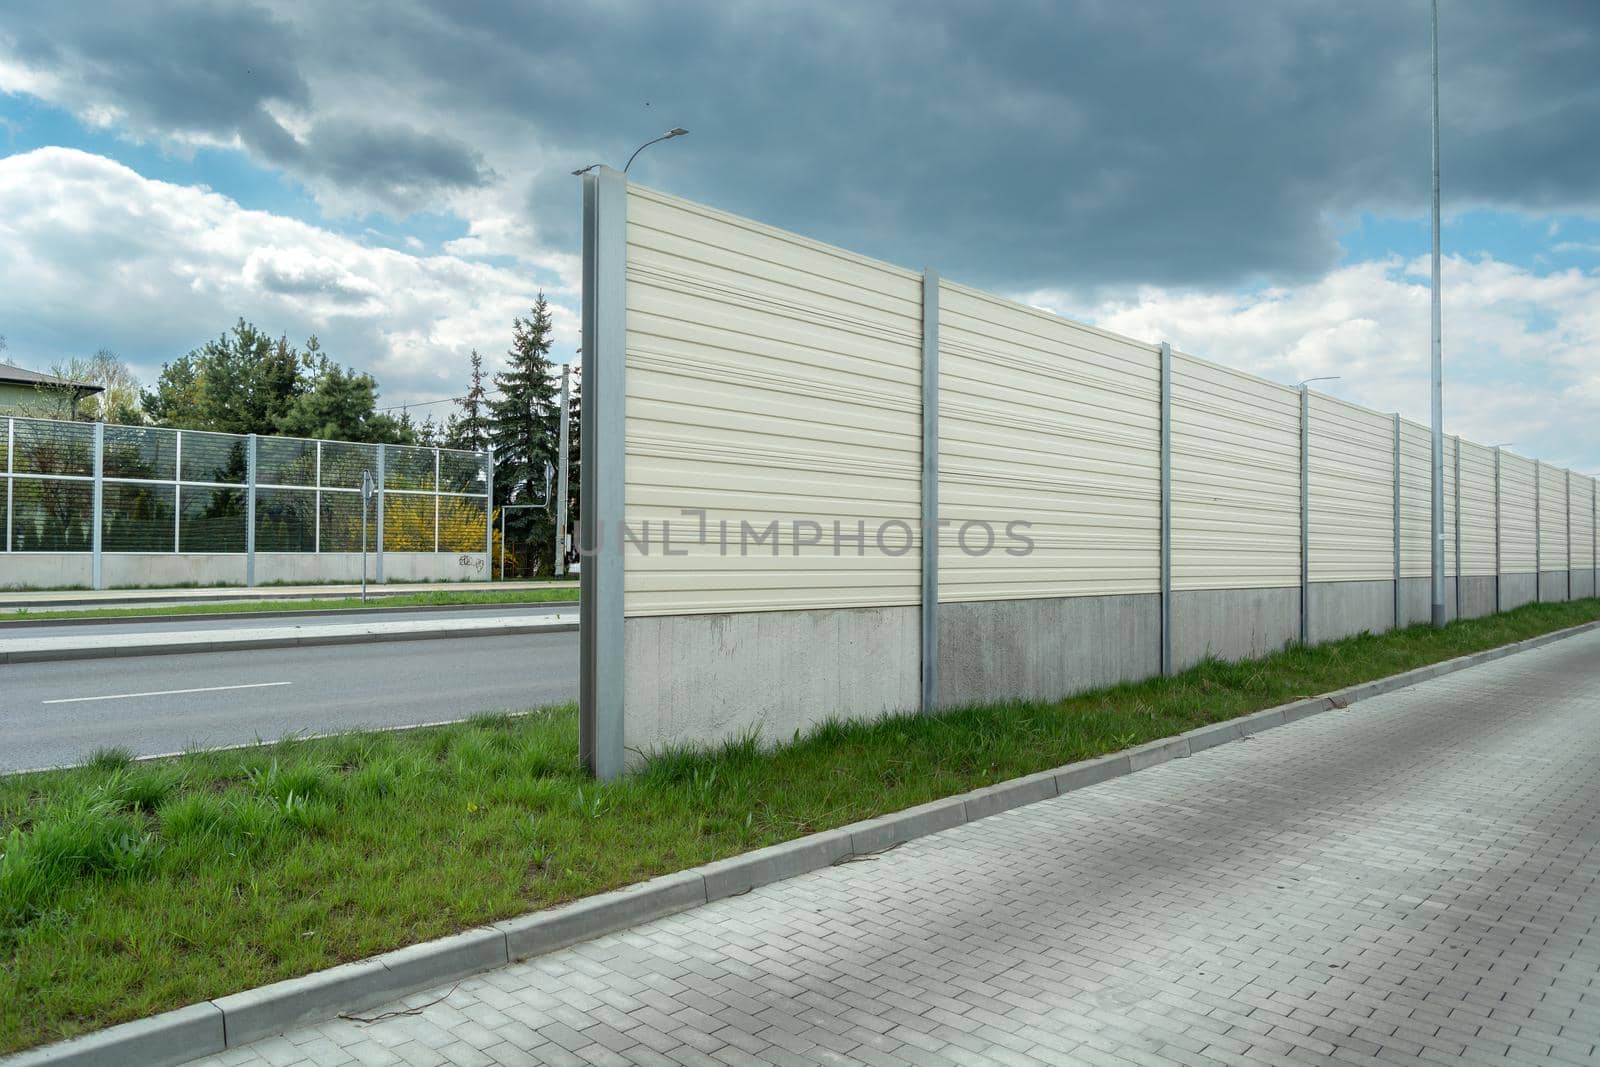 Noise barriers between two roads and cloudy sky by darekb22